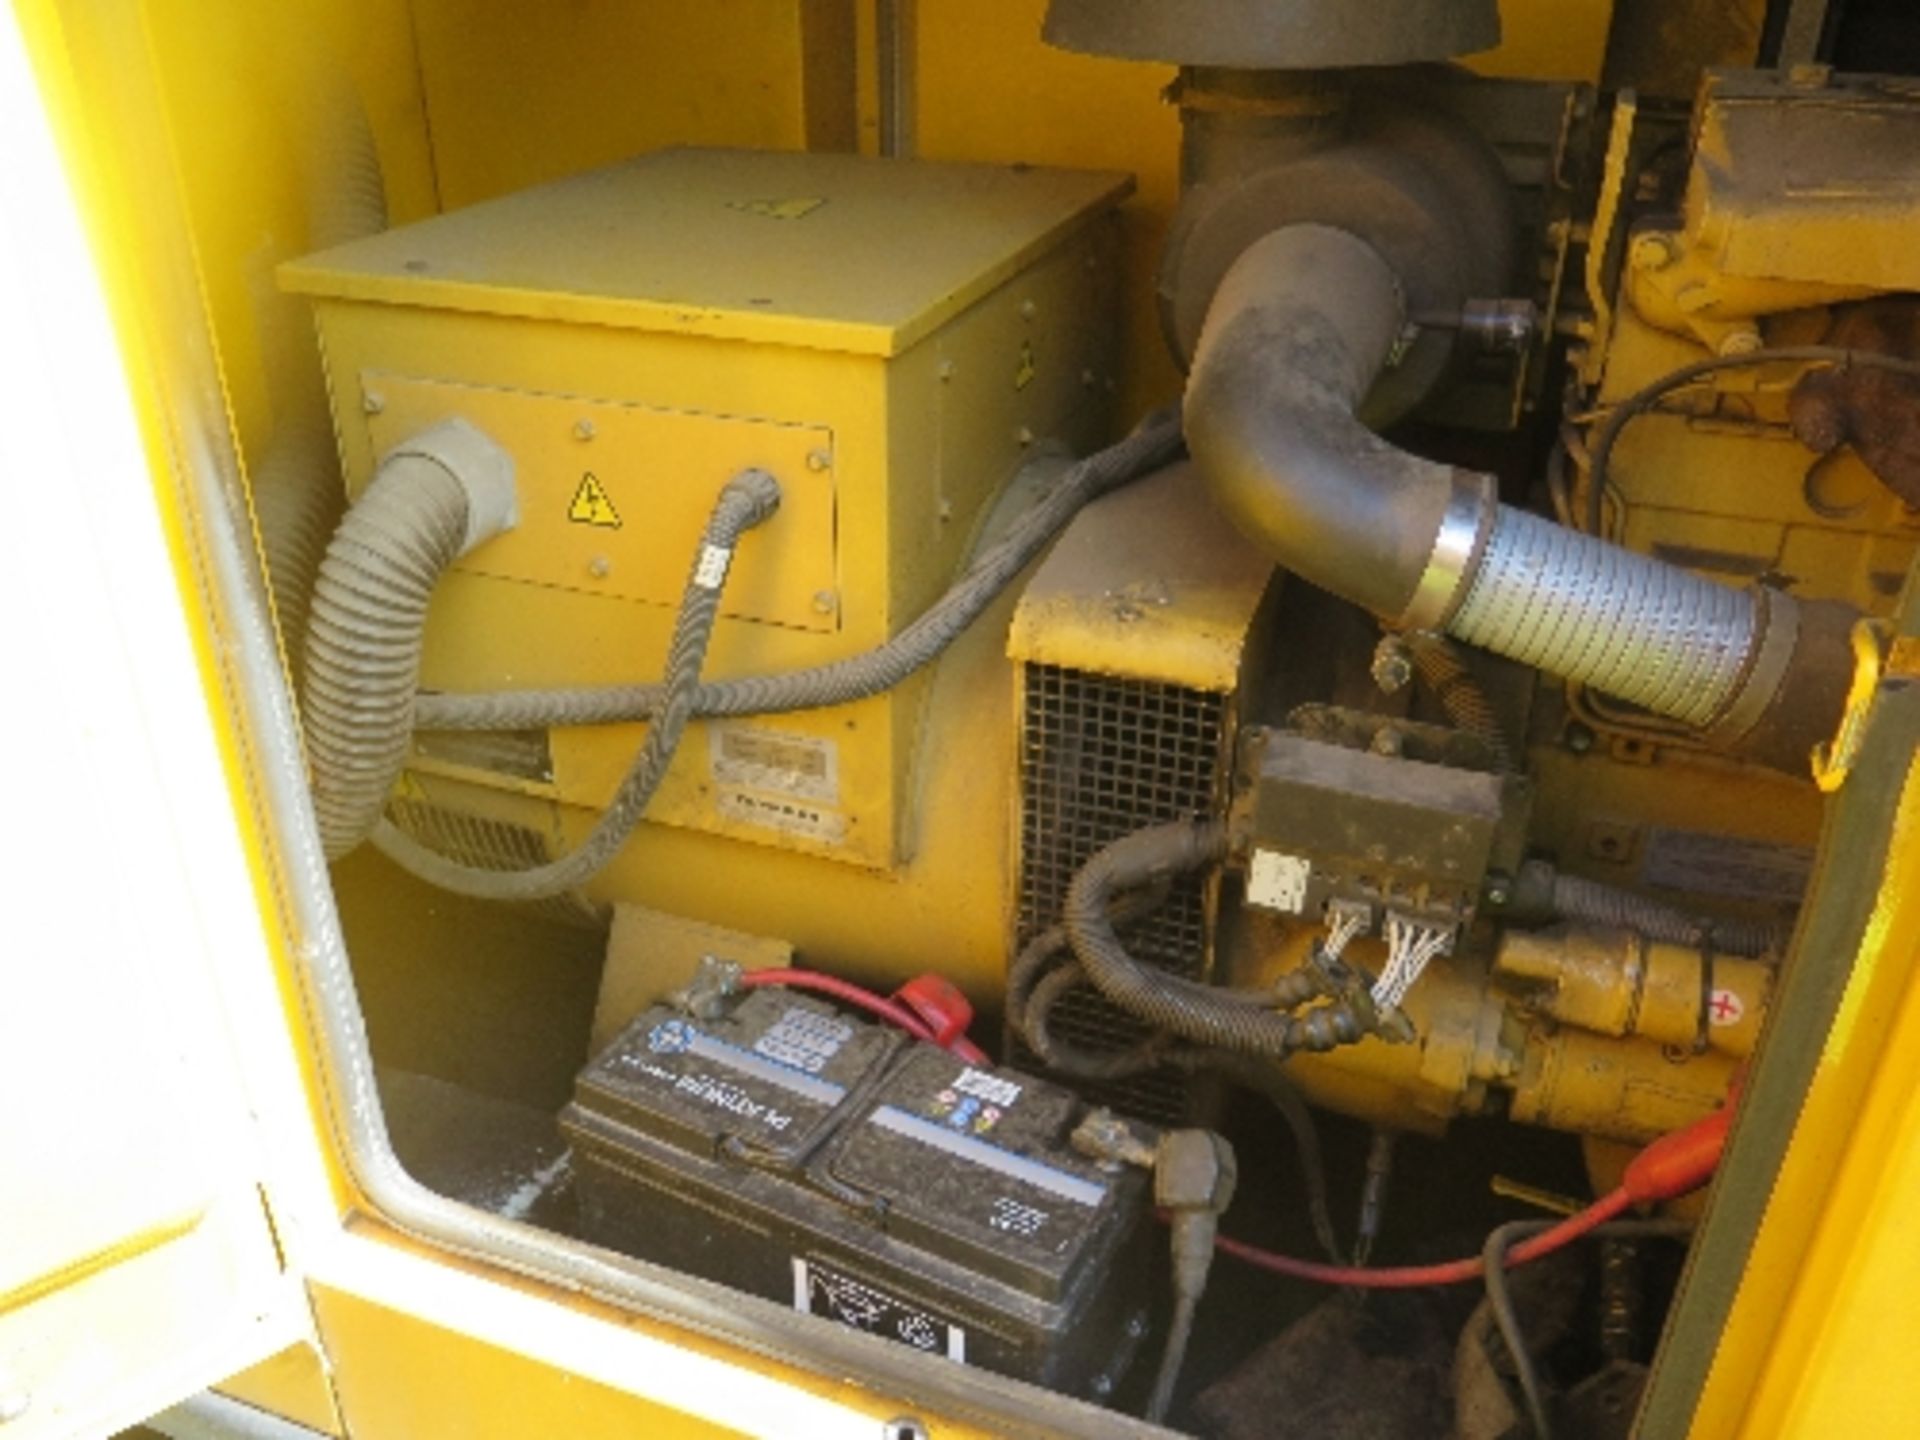 Caterpillar XQE100 generator 30132 hrs 138851
PERKINS - RUNS AND MAKES POWER
ALL LOTS are SOLD - Image 5 of 6